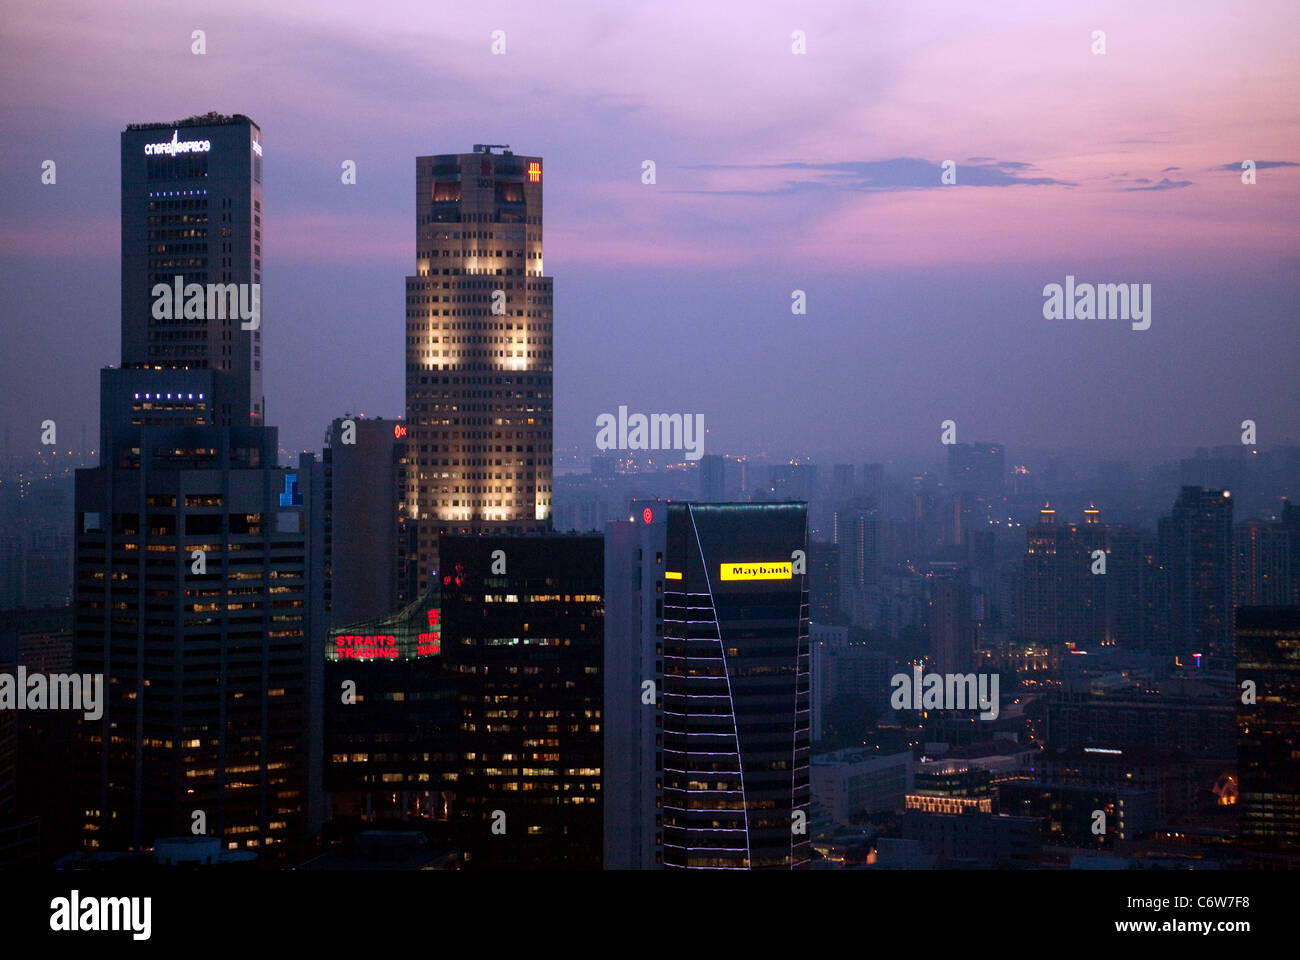 Singapore Skyline over the marina and Financial District at dusk Stock Photo